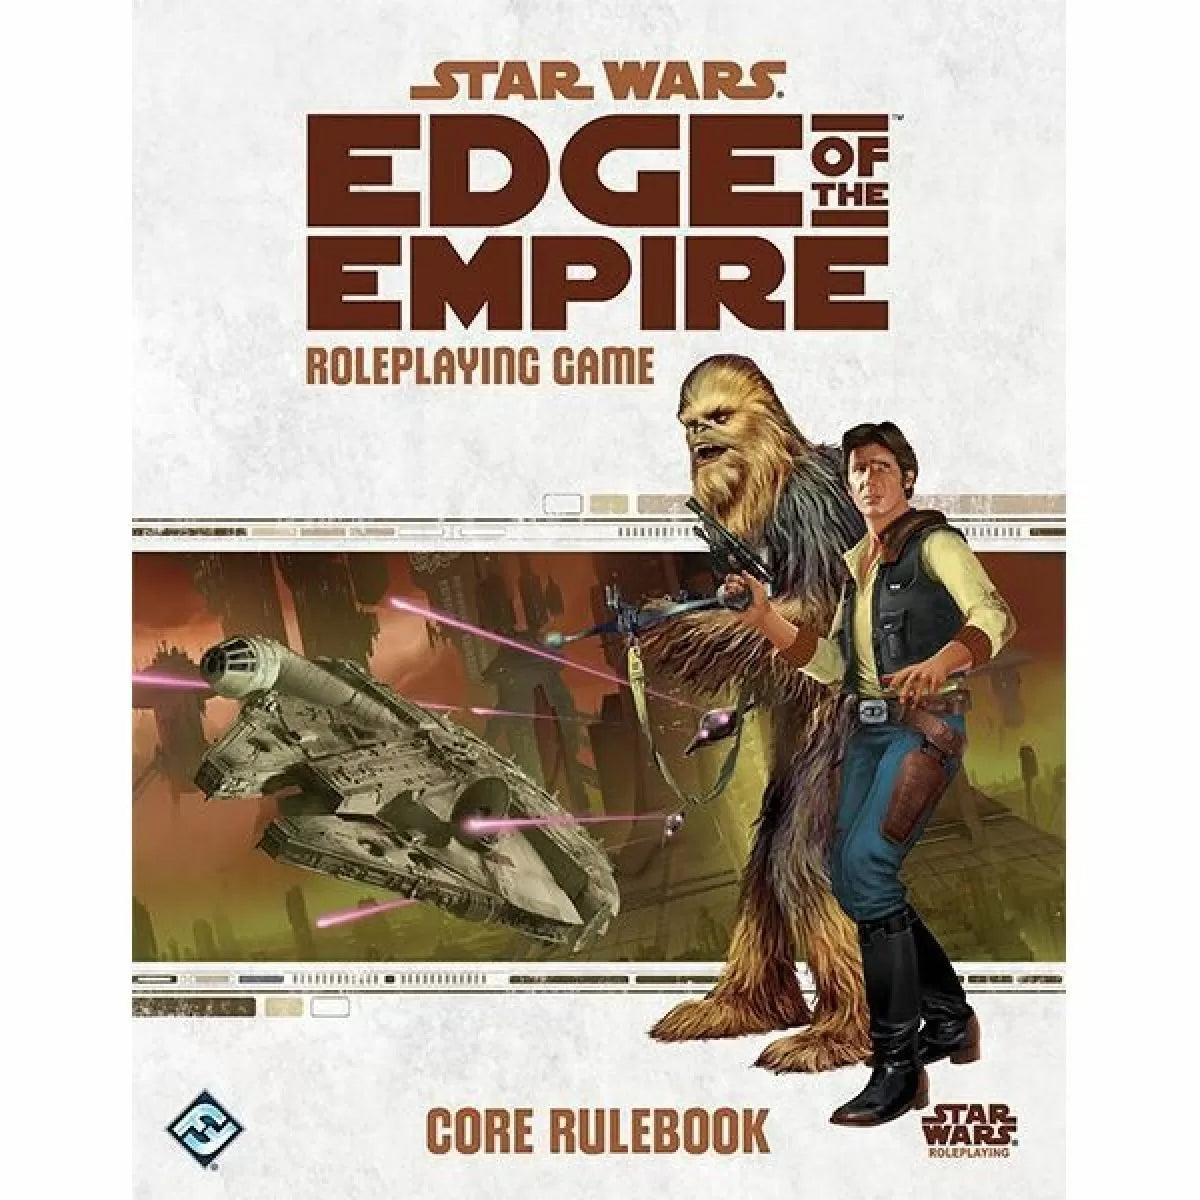 Star Wars Edge of the Empire RPG Rulebook